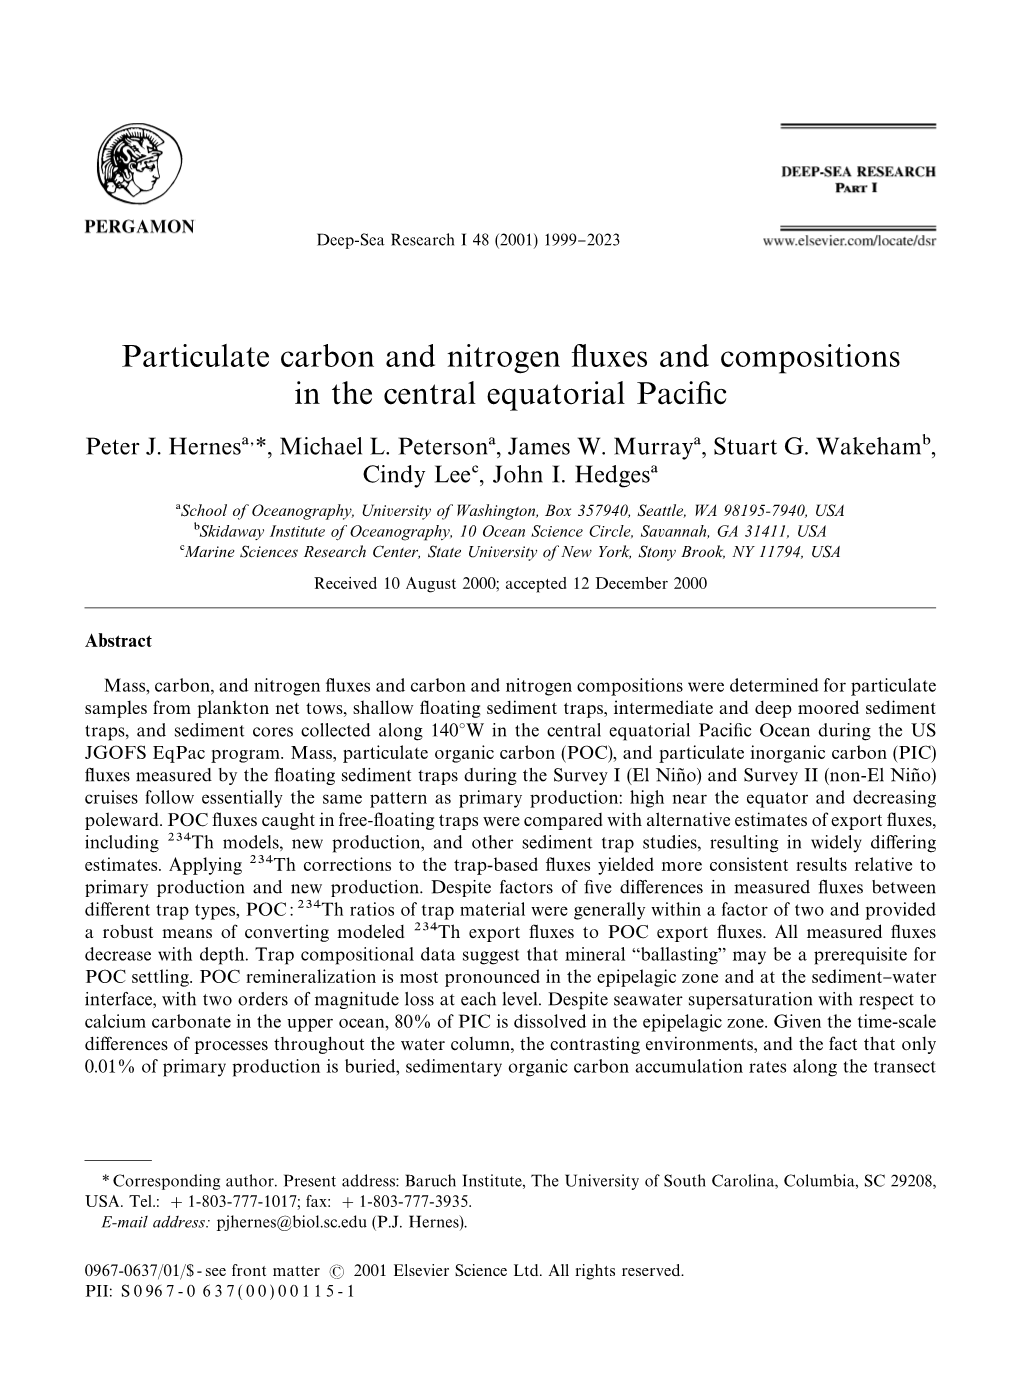 Particulate Carbon and Nitrogen #Uxes and Compositions in the Central Equatorial Paci"C